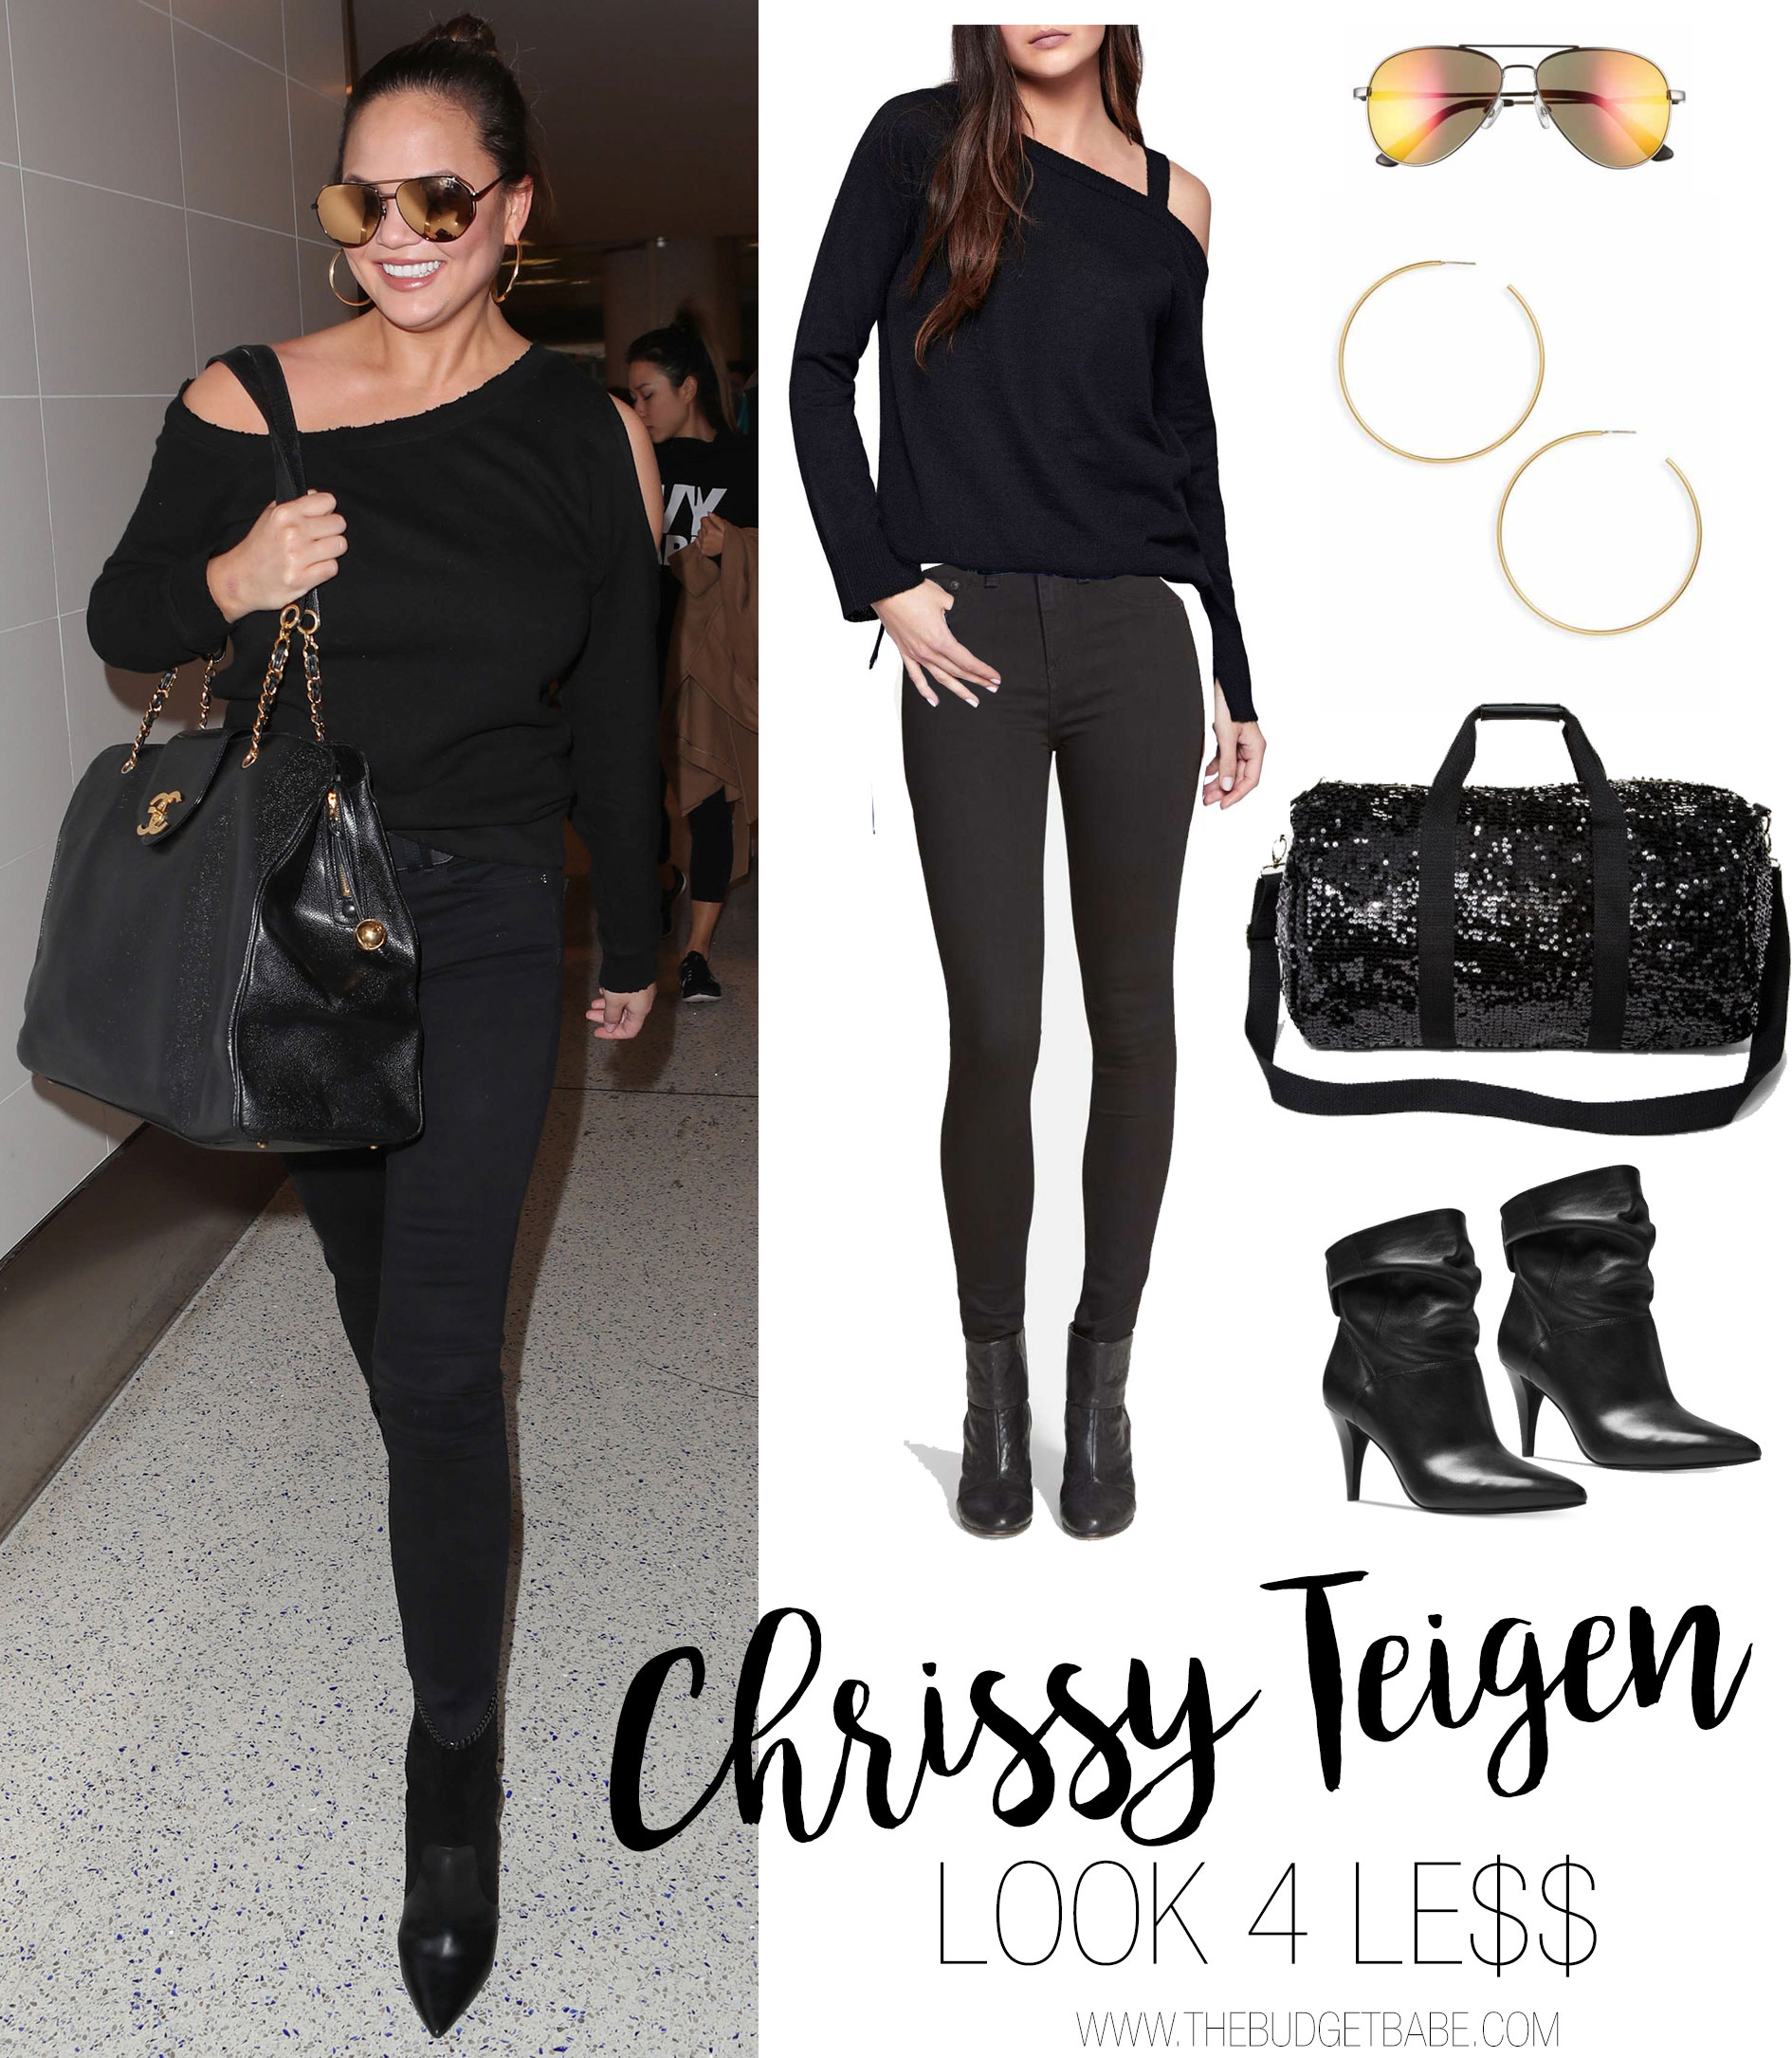 Chrissy Teigen wears a cold shoulder top and Chanel bag while traveling.